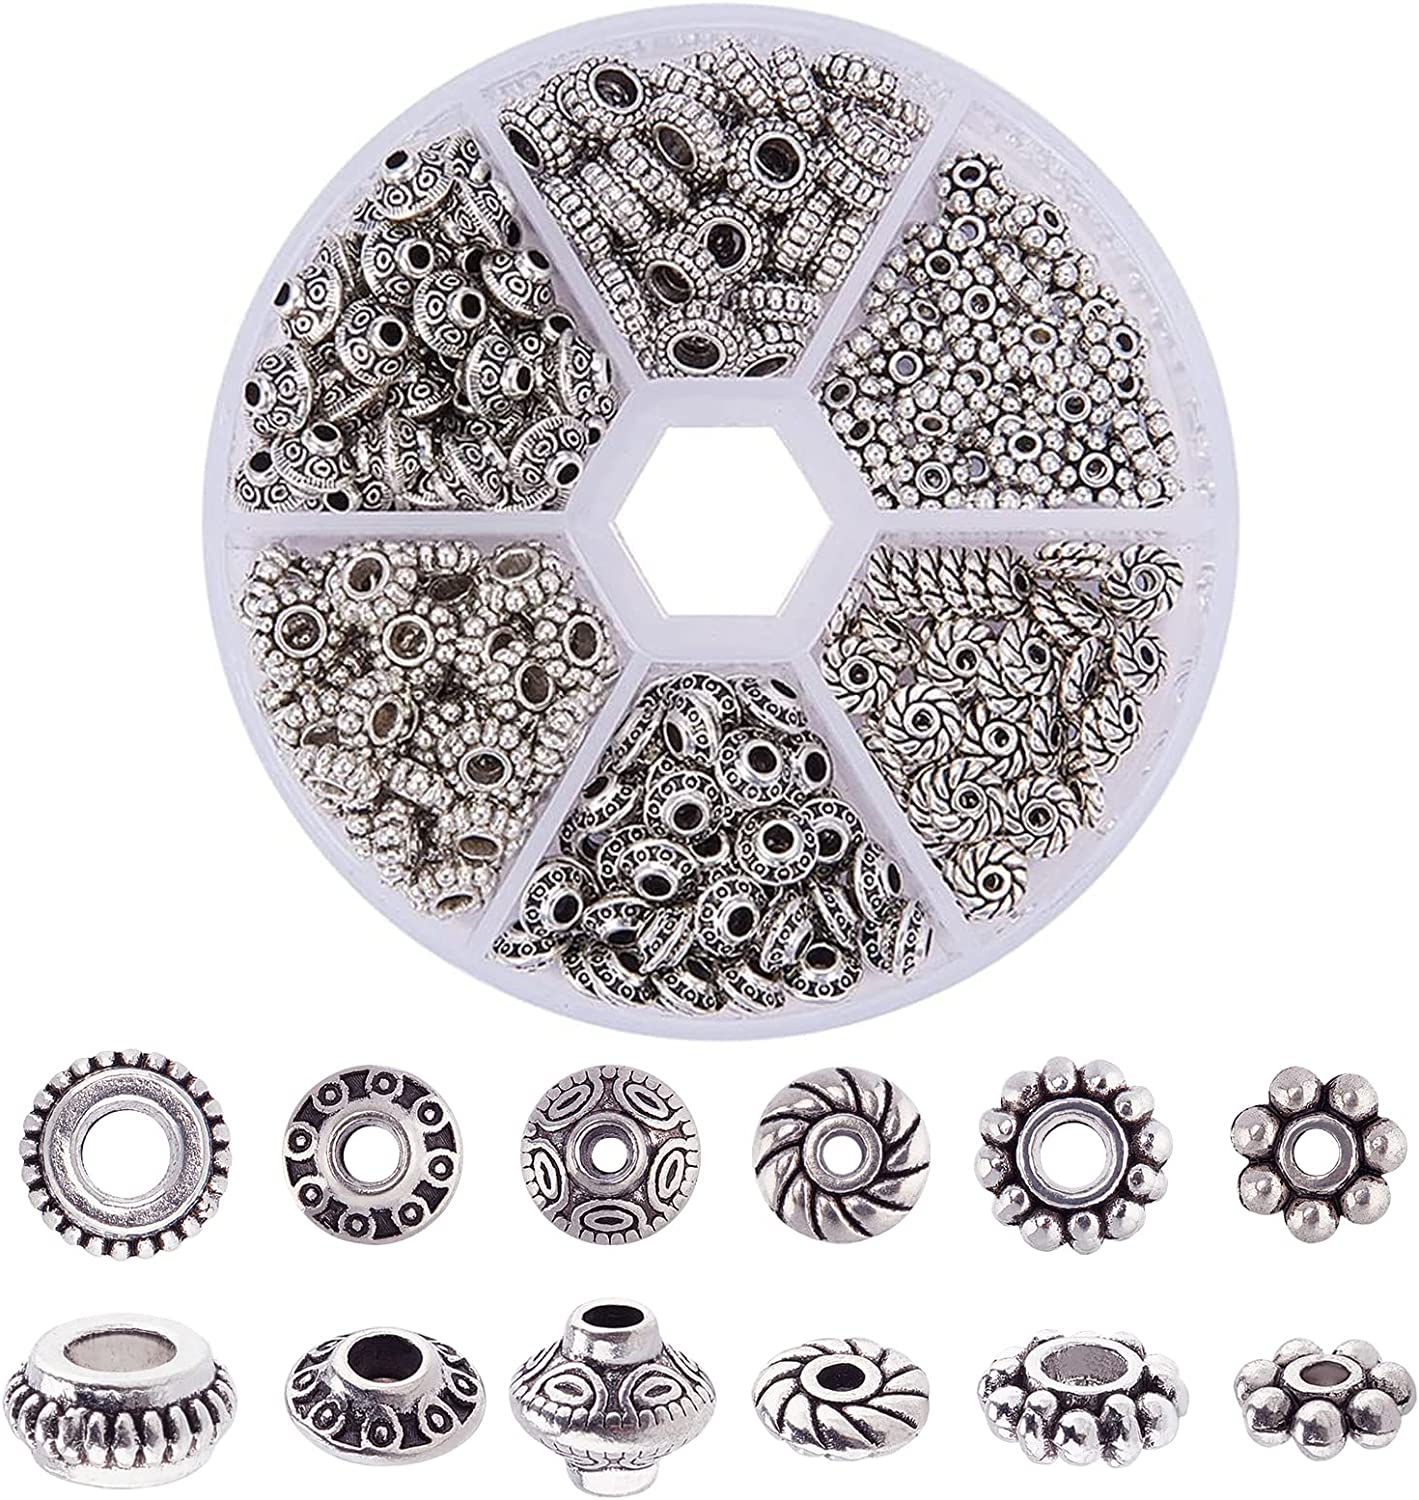 300pcs 6 Style Antique Silver Spacer Beads Tibetan Metal Alloy Jewelry  Beads Tube Spacers Flower Flat Rondelle Small Loose Beads for Bracelet  Necklace